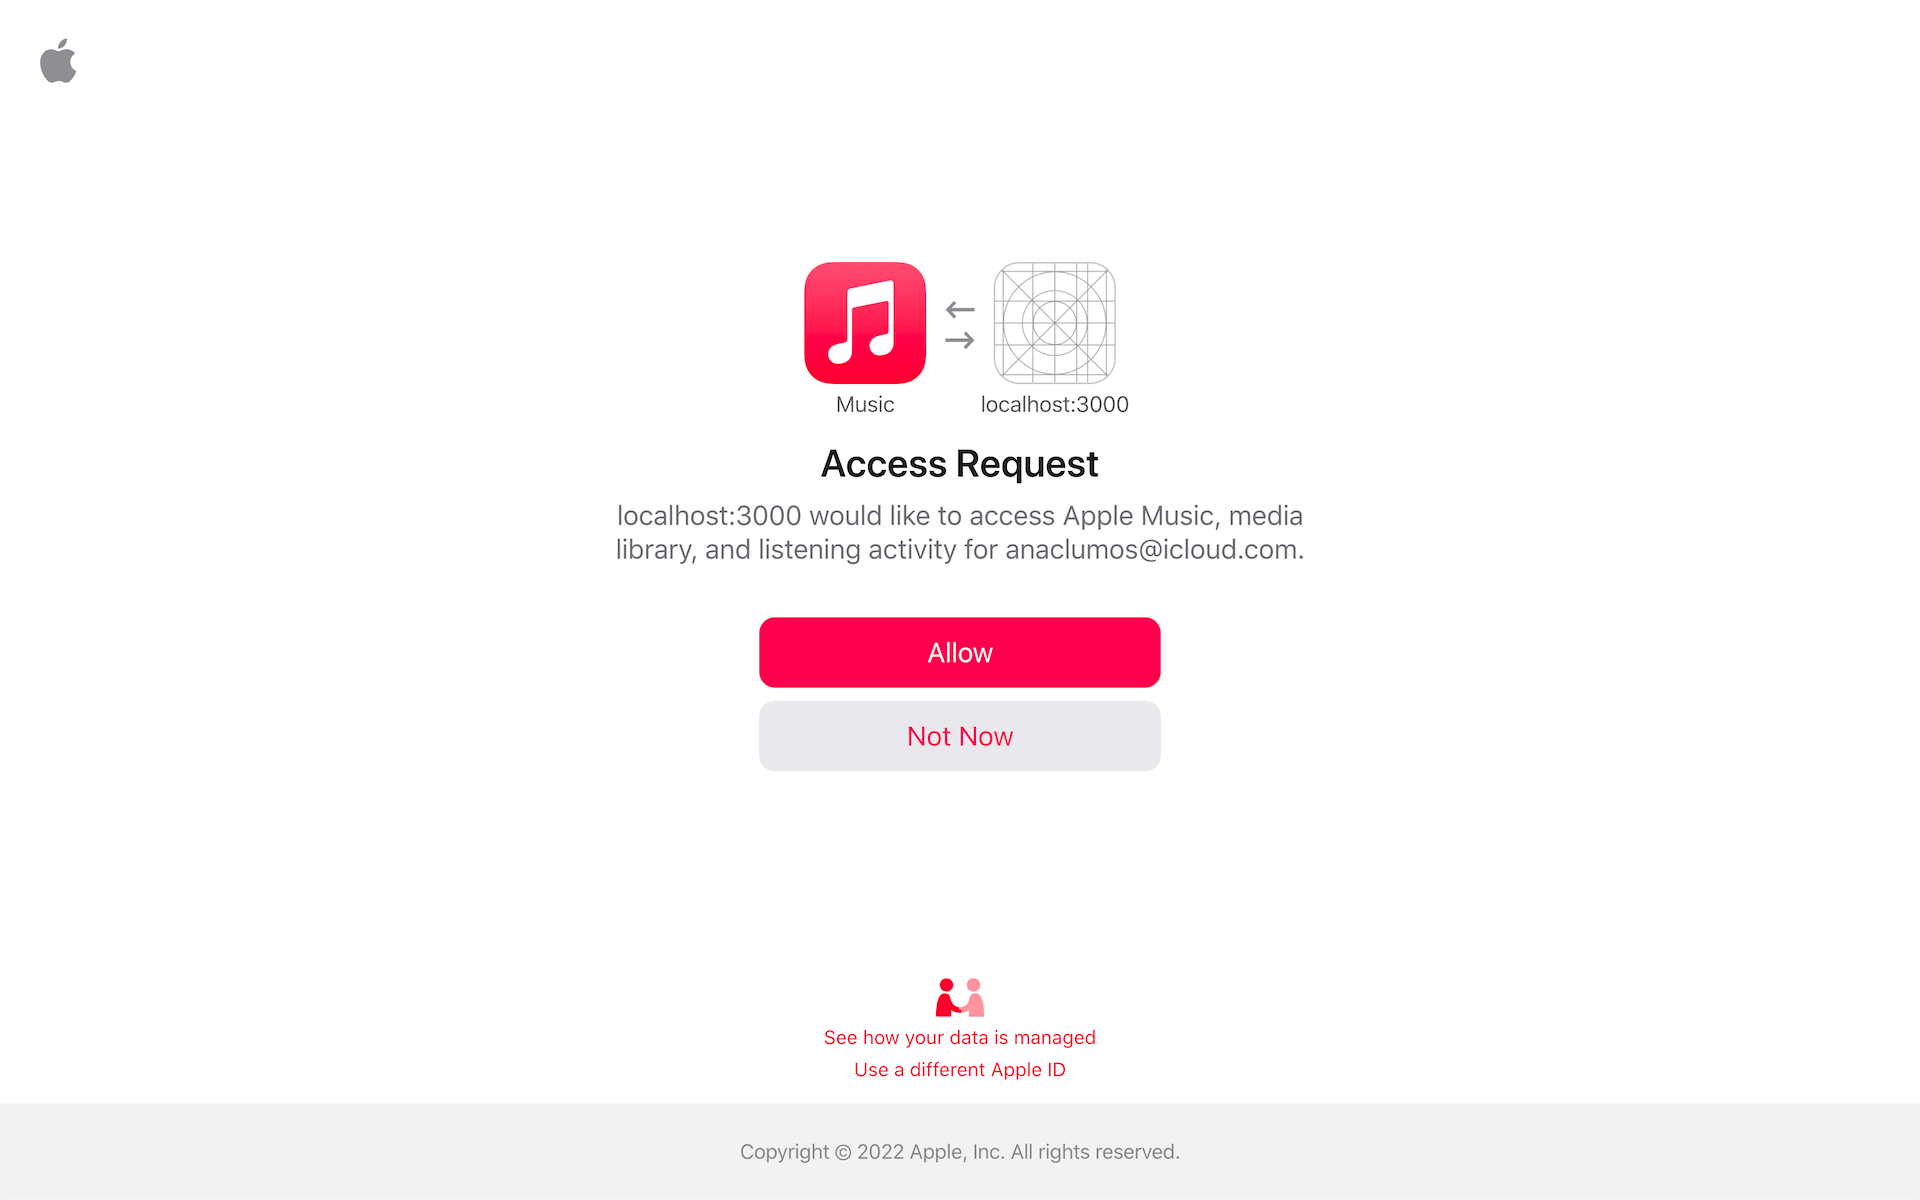 It will show the Apple Music access grant page like this.